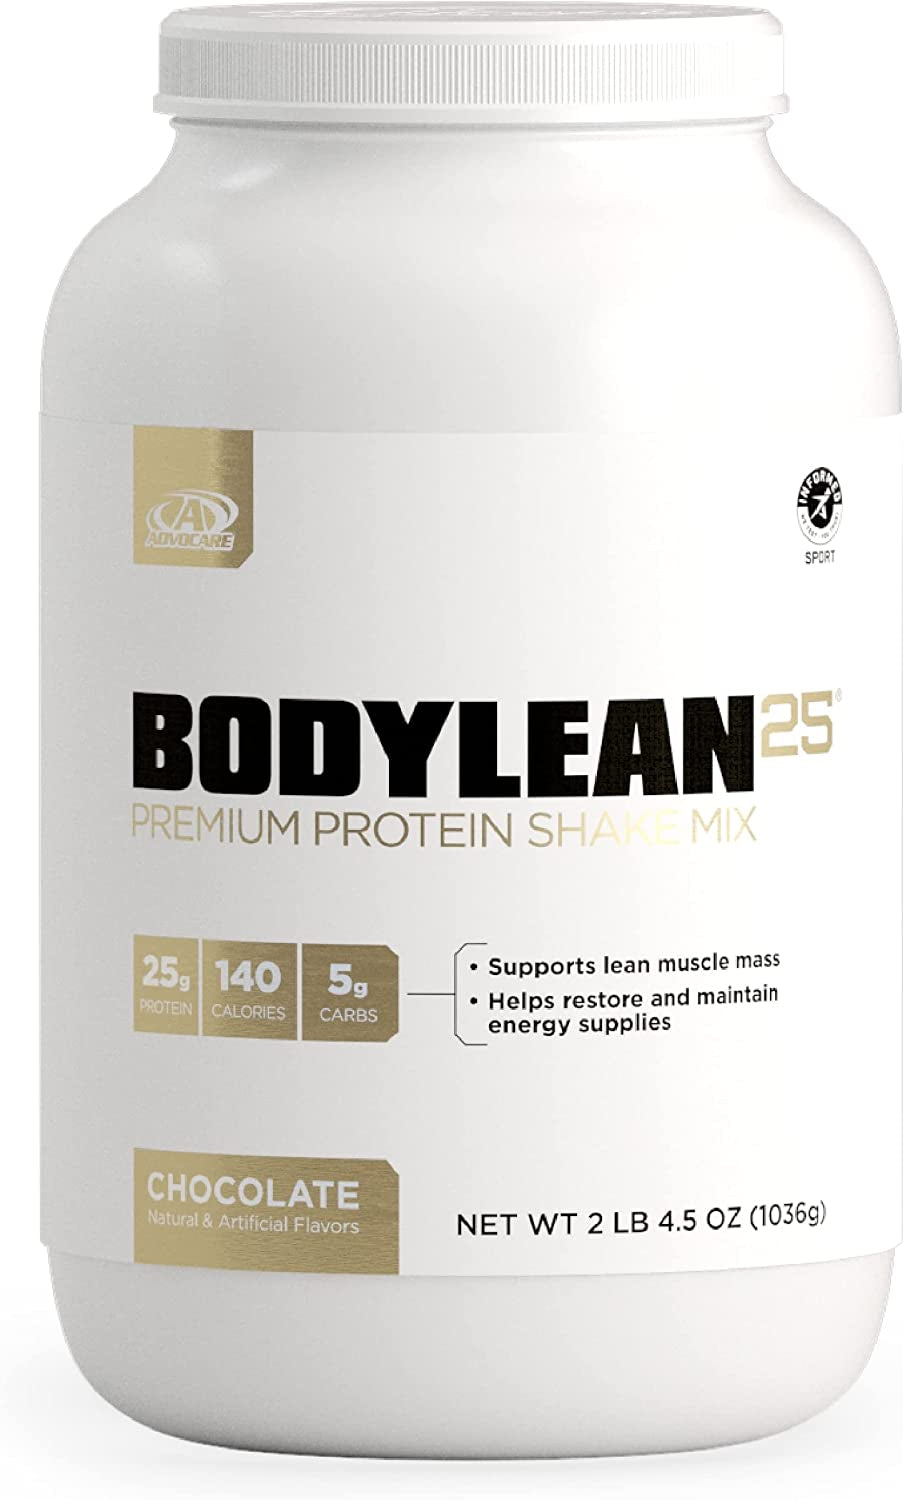 Advocare Bodylean25 Protein Shake Mix - Whey Protein Powder for Muscle Building - Whey Isolate Protein Powder - Whey Concentrate Protein Powder - Protein Shakes Powder - Chocolate - 2 Lb 4.5 Oz